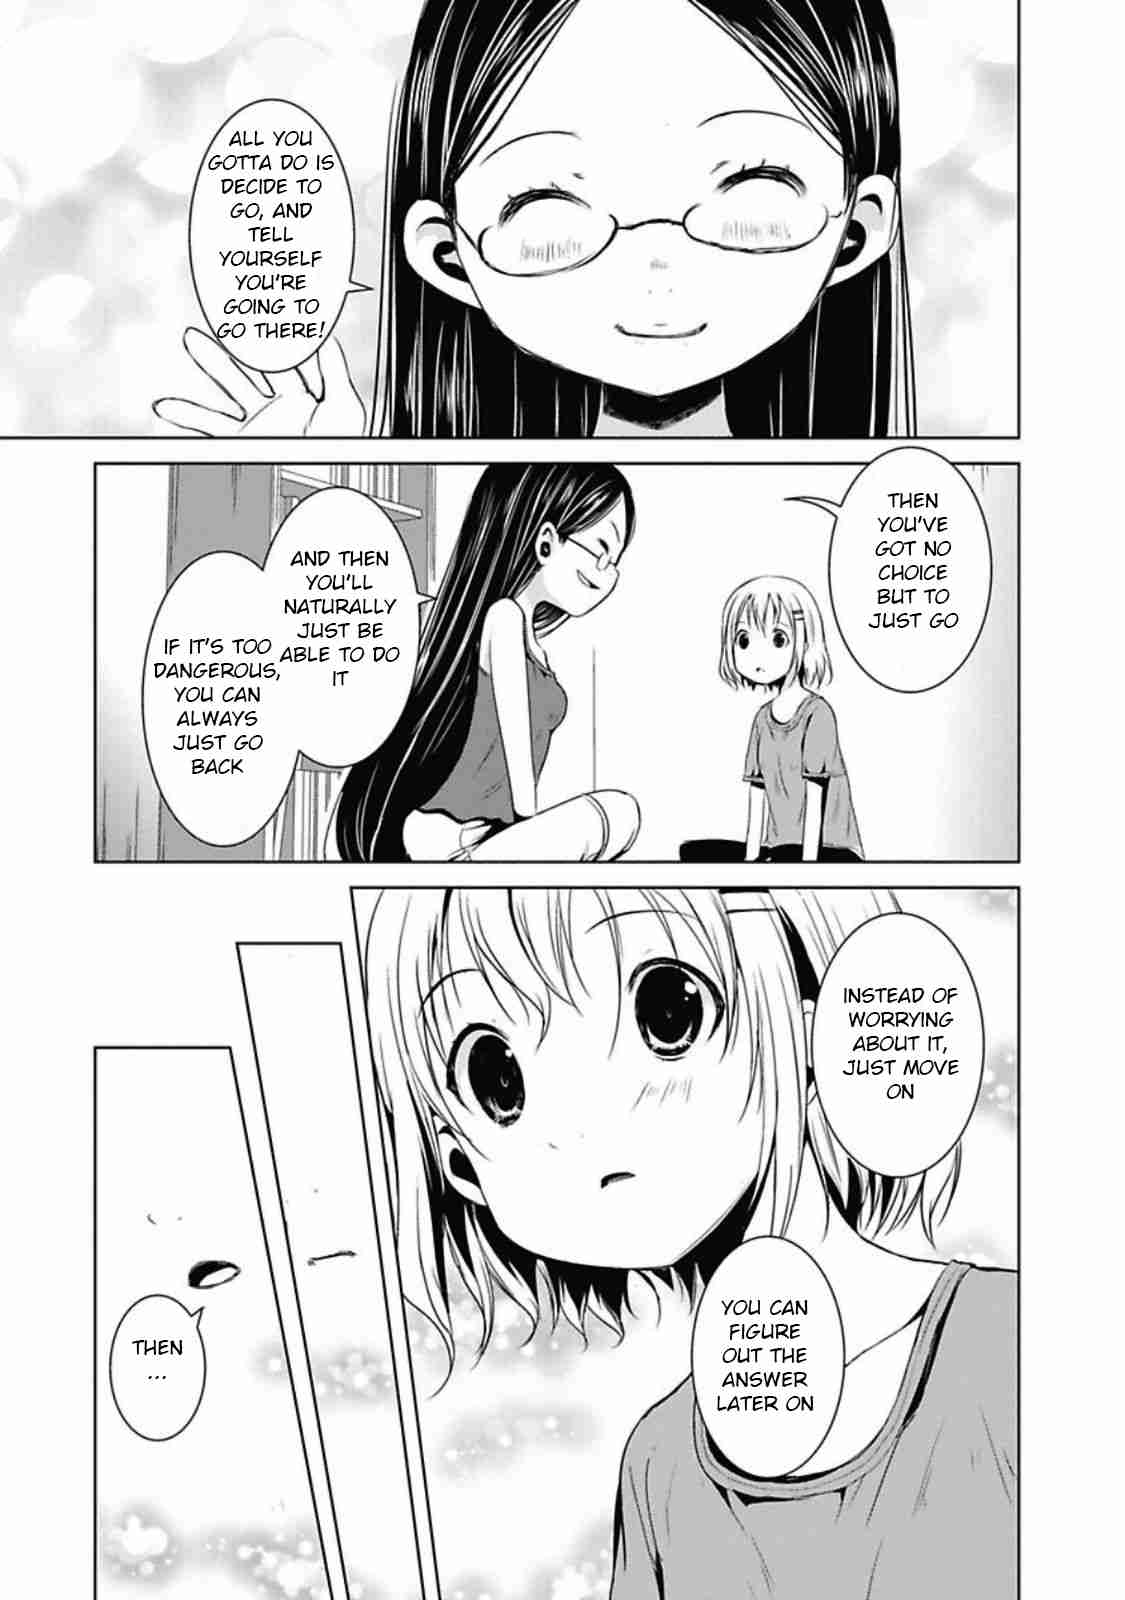 Yama No Susume Vol. 4 Ch. 27 Receiving Feelings to Keep Going